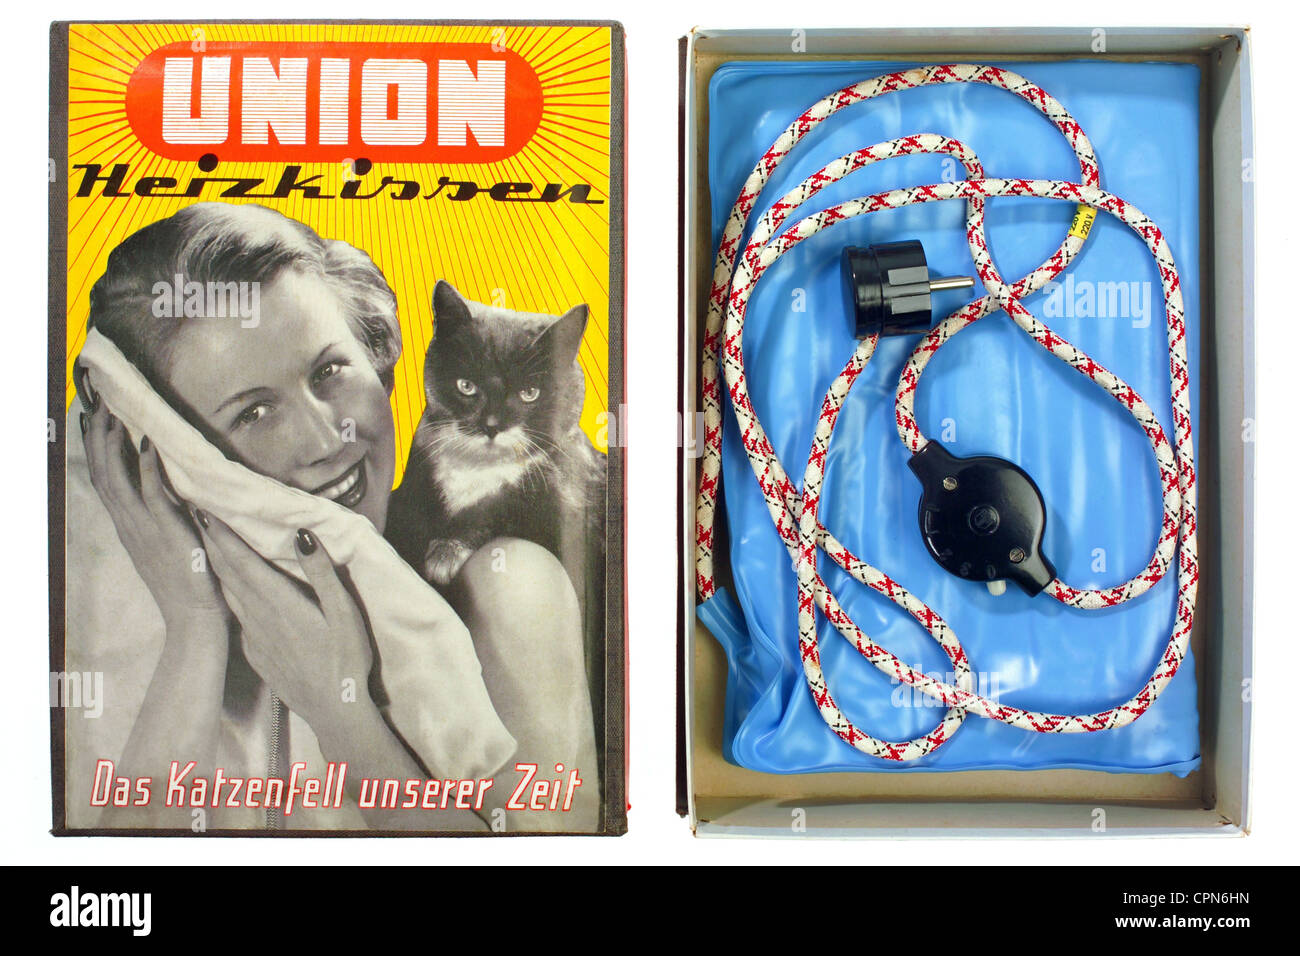 household, electric electric pad, original packing, made by Union, woman with cat, advertising slogan: 'Das Katzenfell unserer Zeit' (The today cat pelt), Germany, circa 1957, Additional-Rights-Clearences-Not Available Stock Photo